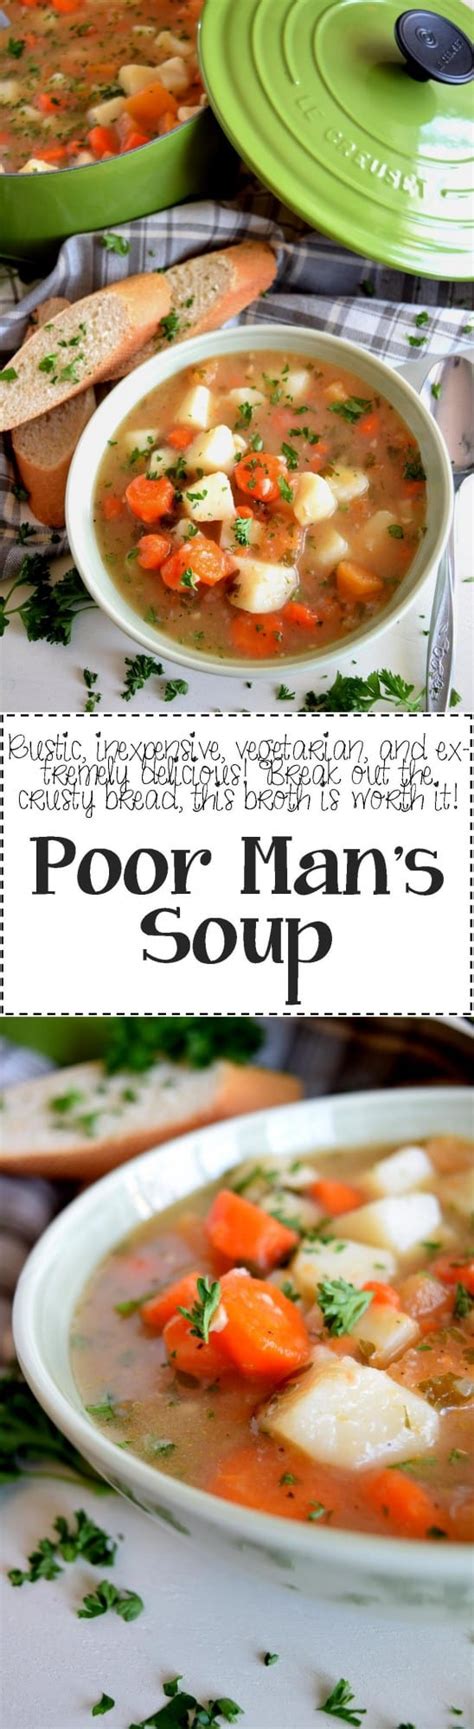 poor-mans-soup-lord-byrons-kitchen image